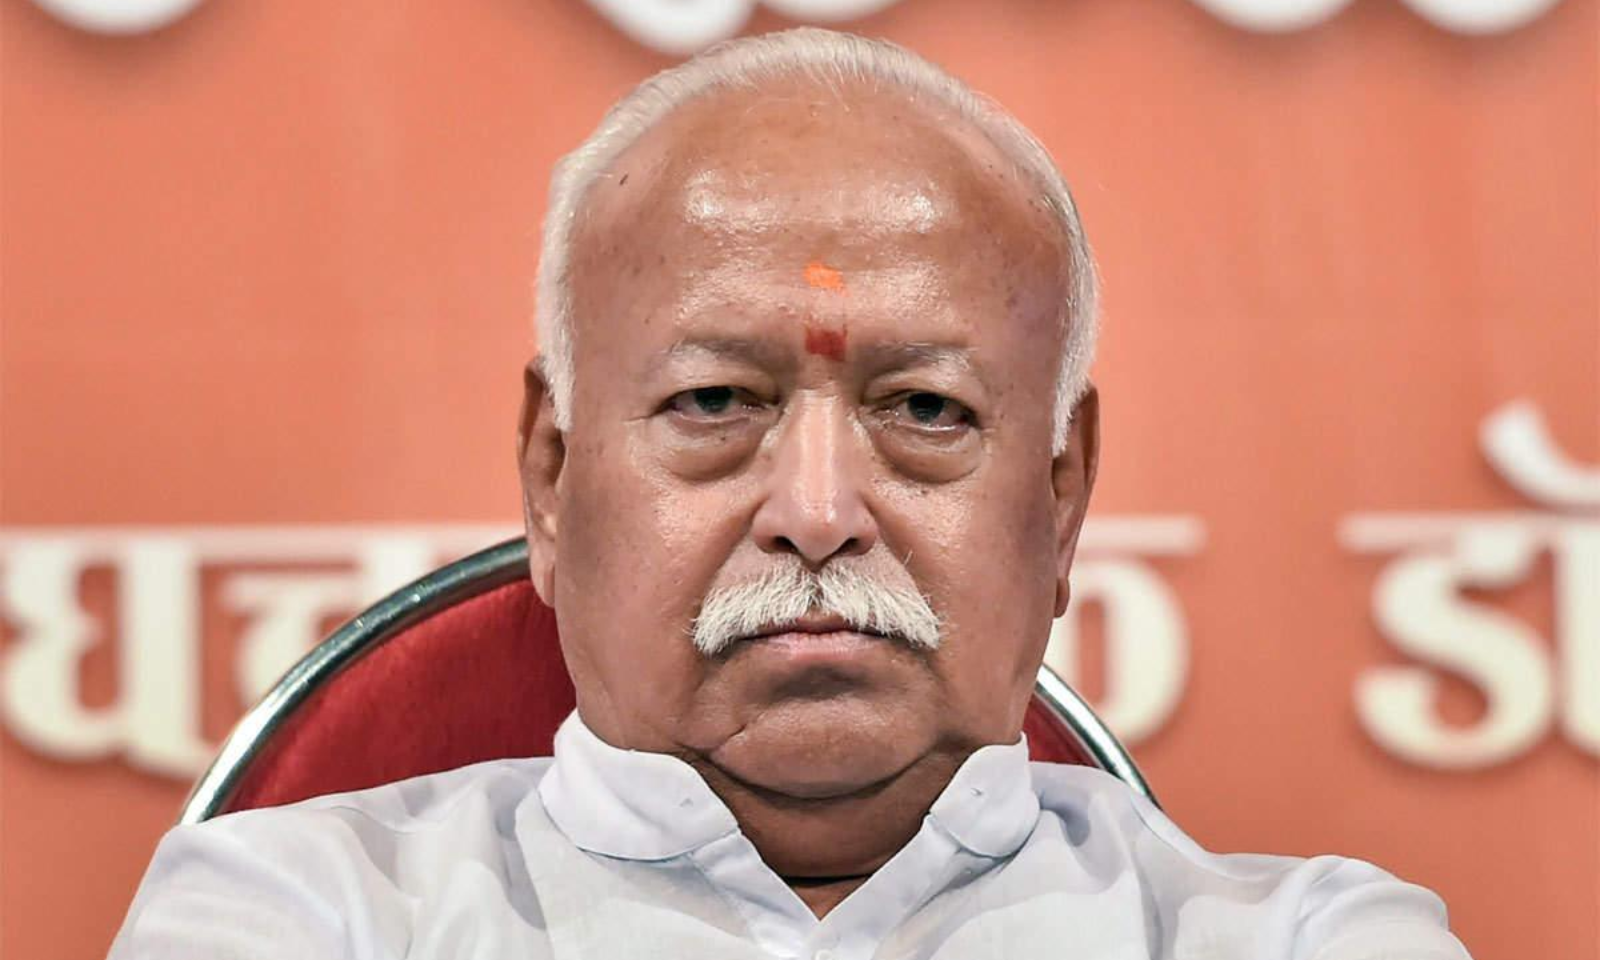 Posting Vulgar Picture Of RSS Chief Mohan Bhagwat: Madhya Pradesh High  Court Denies Anticipatory Bail To The Accused [Read Order]